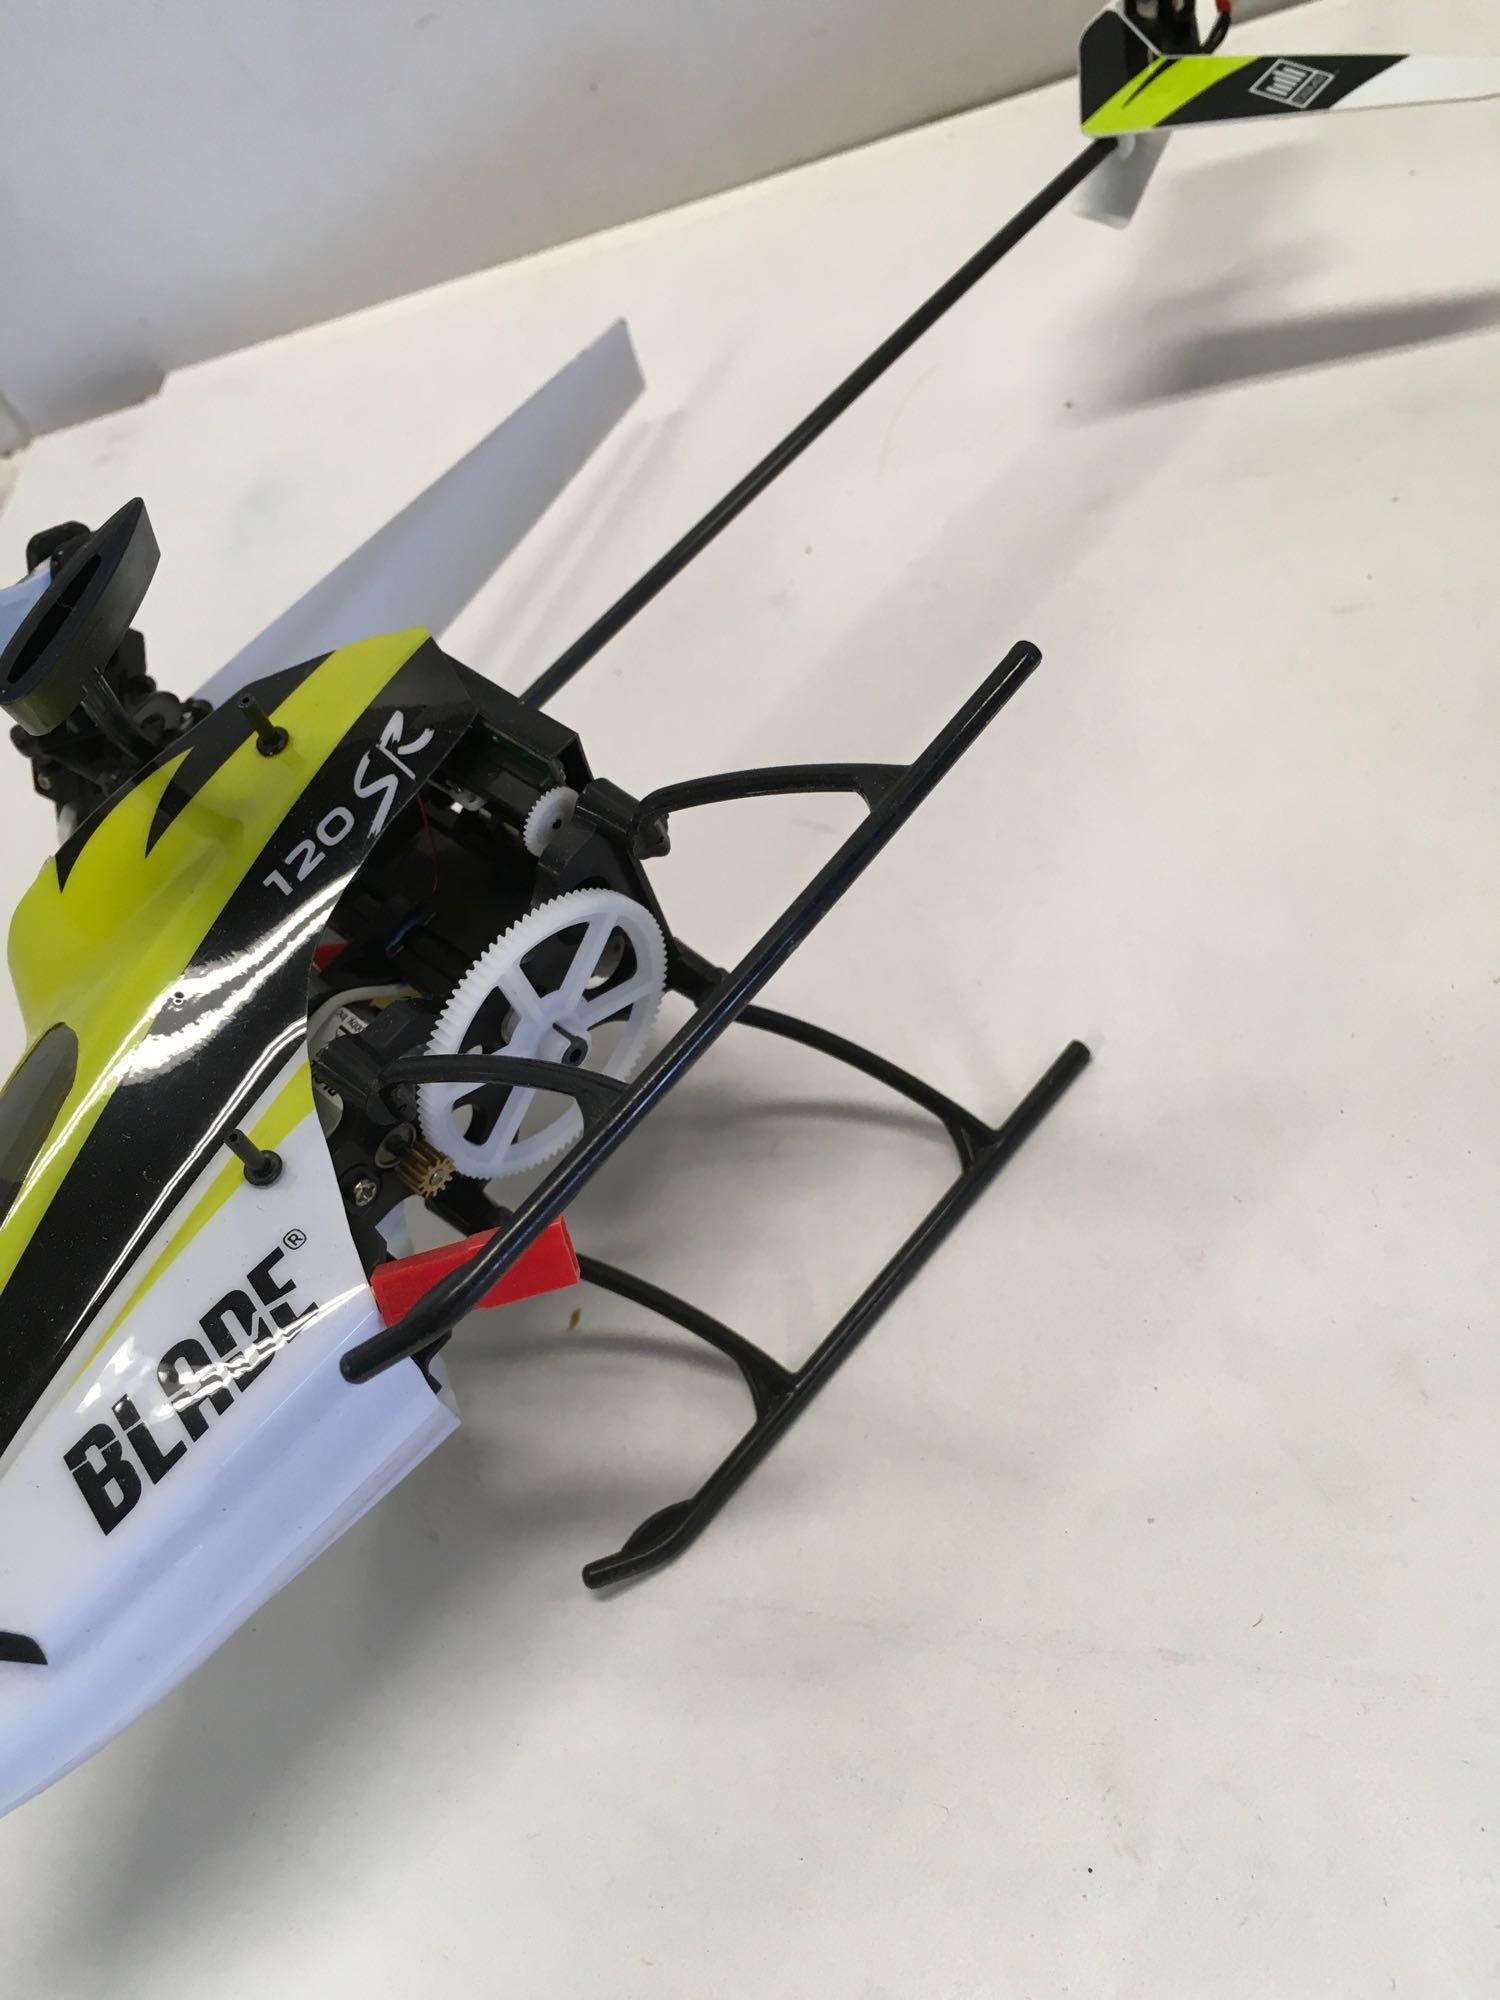 Model aircraft and R/C Blade 120 SR